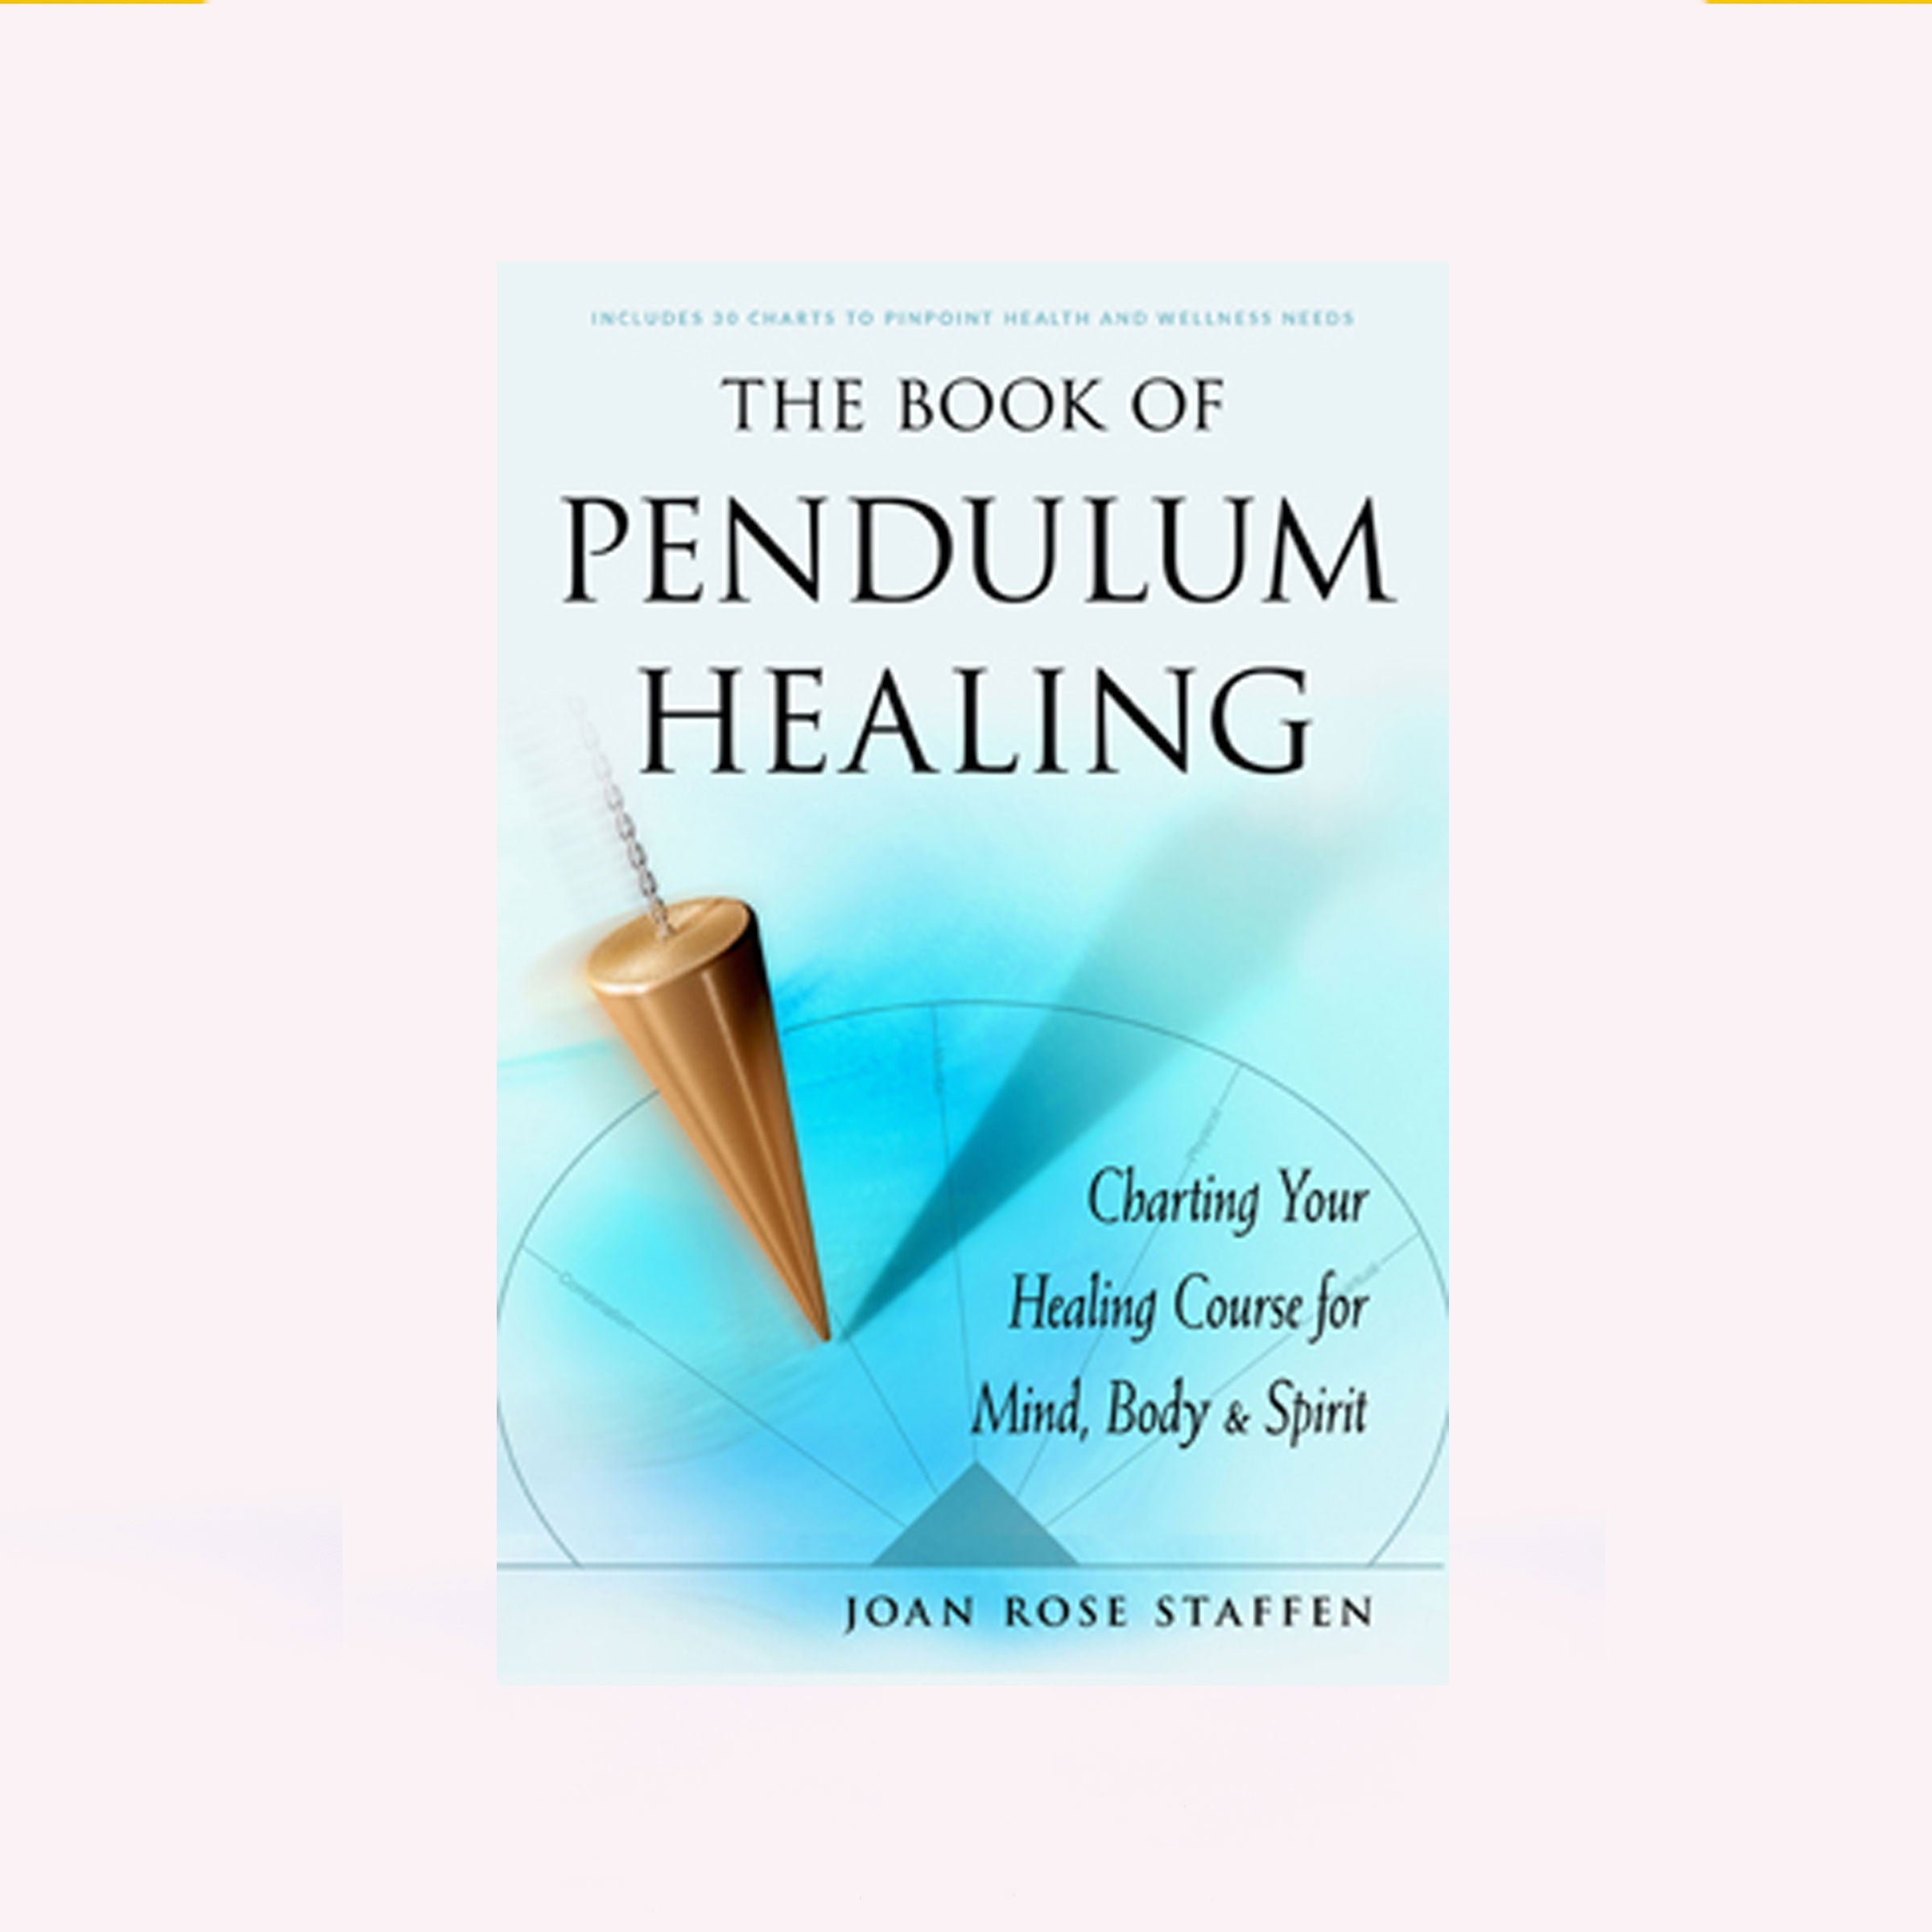 Charting Your Healing Course for Mind, Body & Spirit